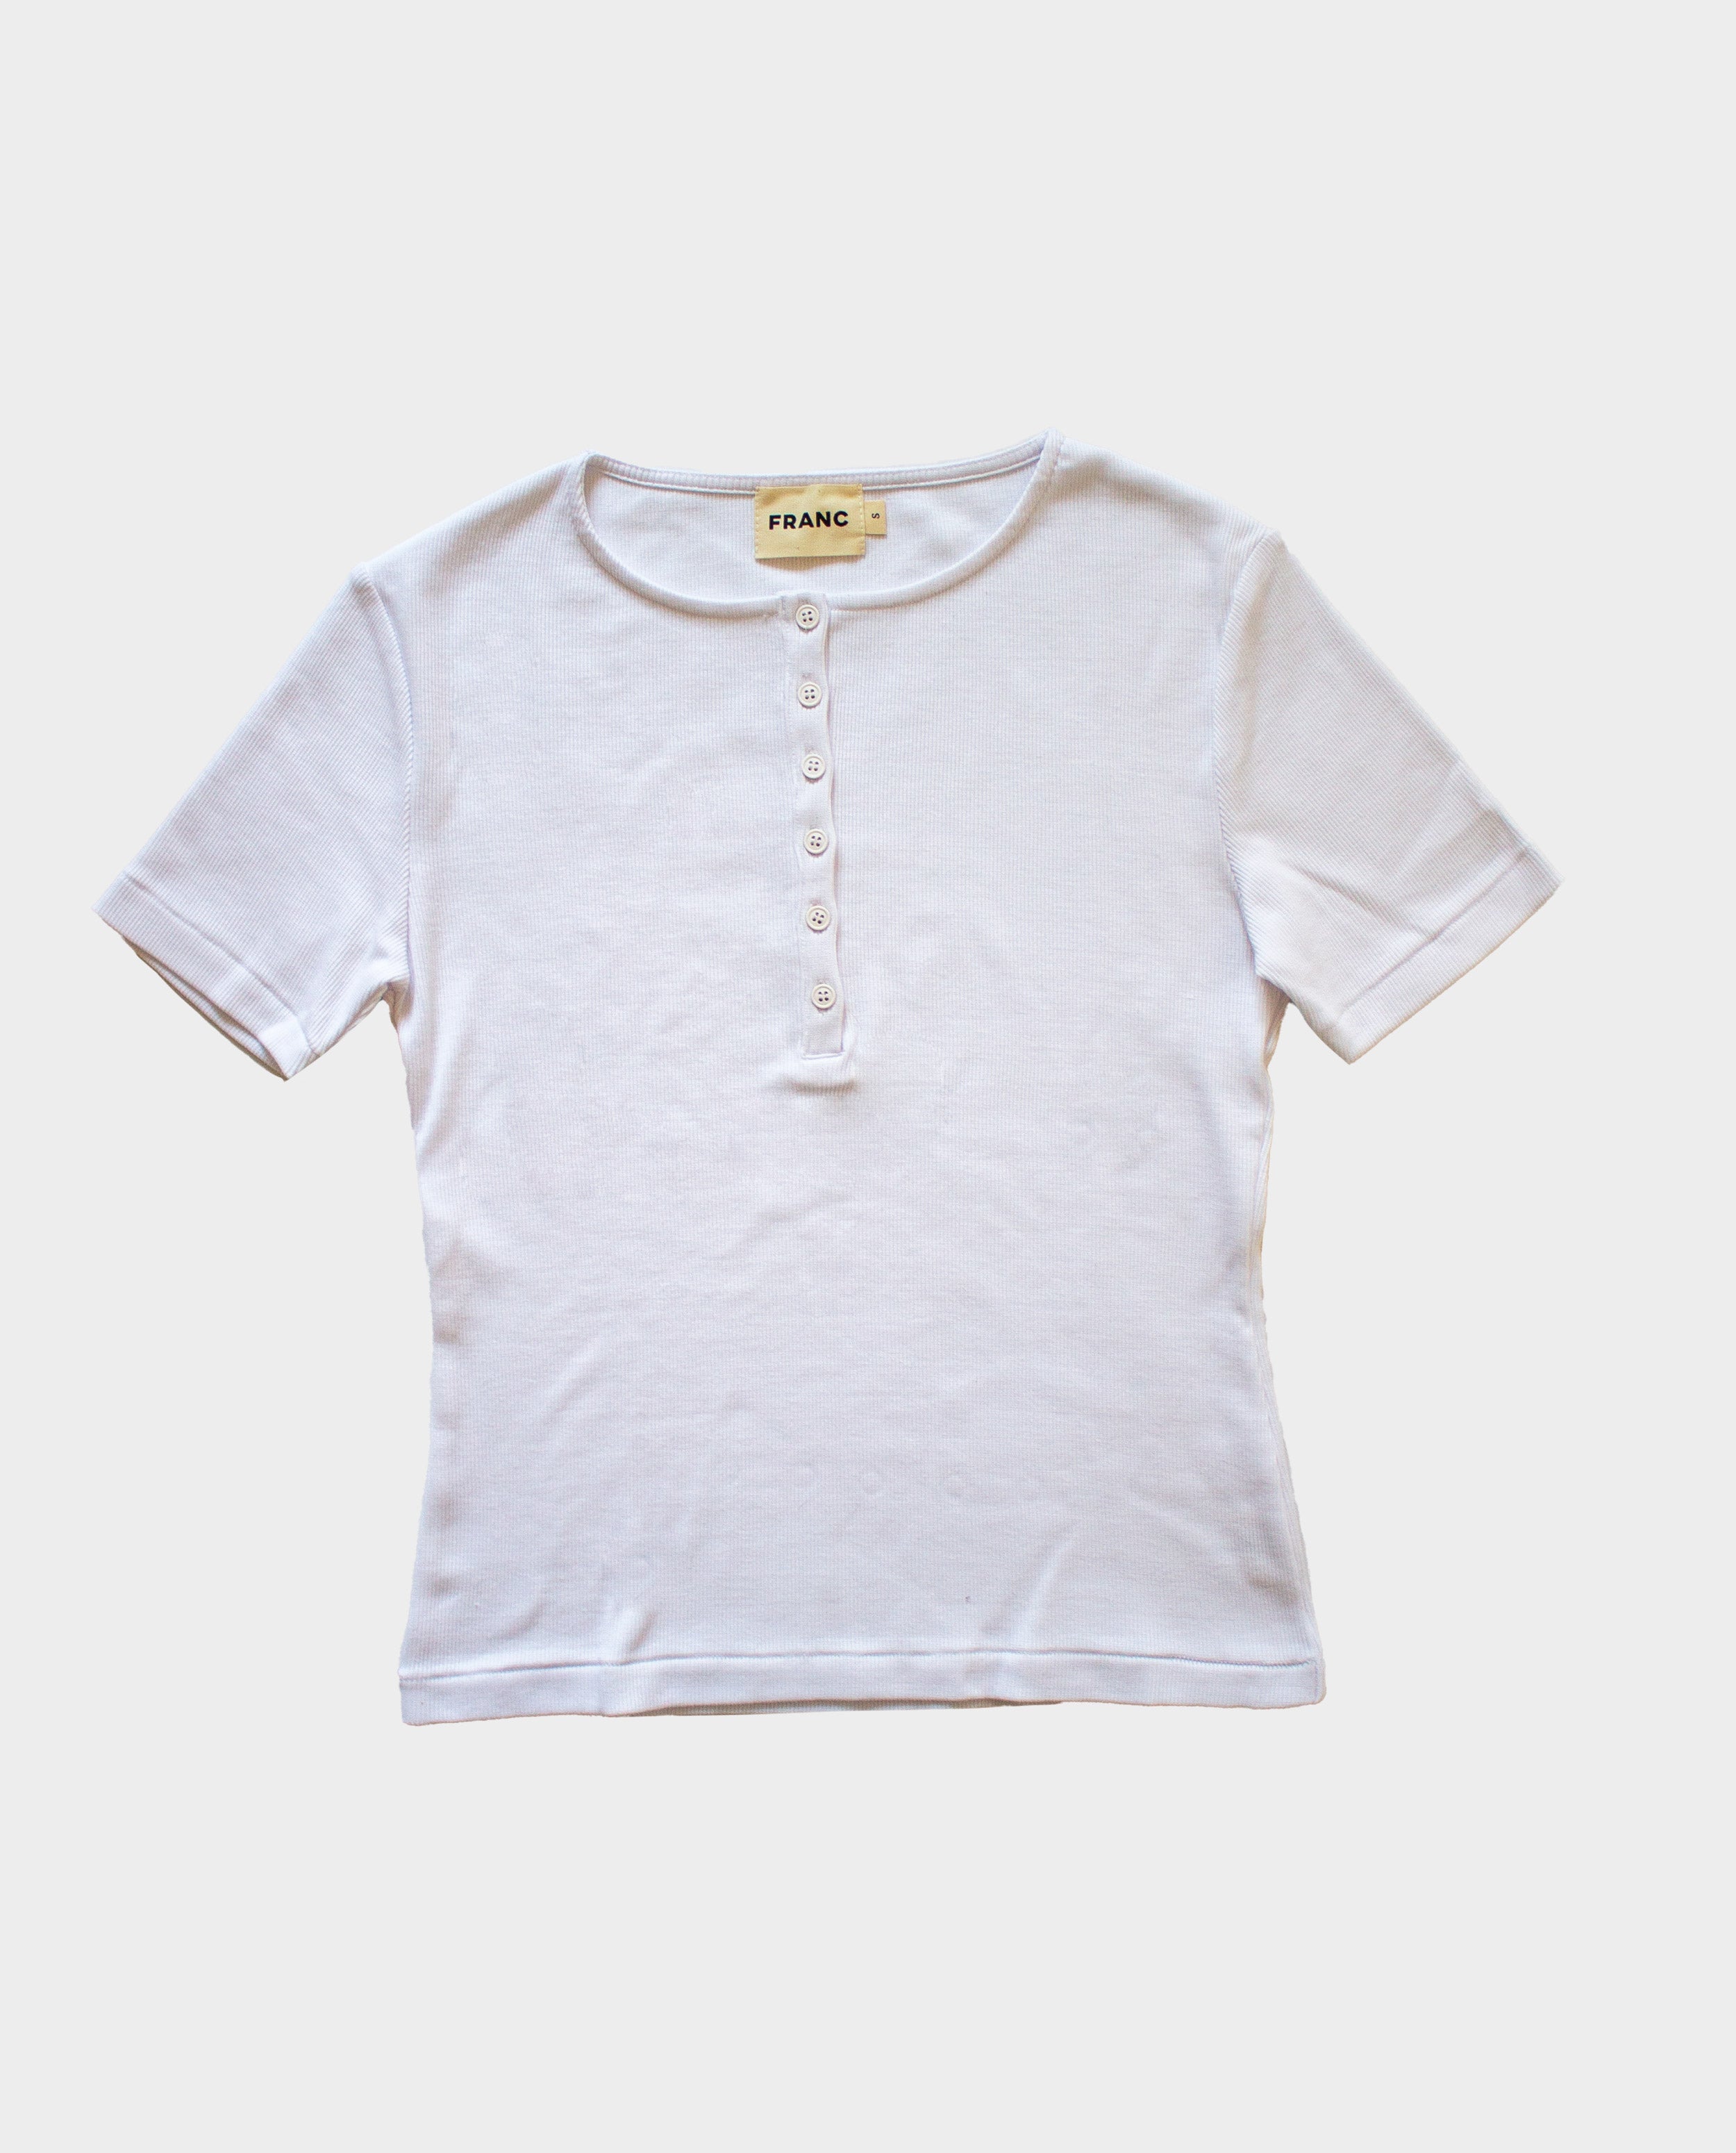 The Rib Henley Shirt in White | FRANC Sustainable Clothing